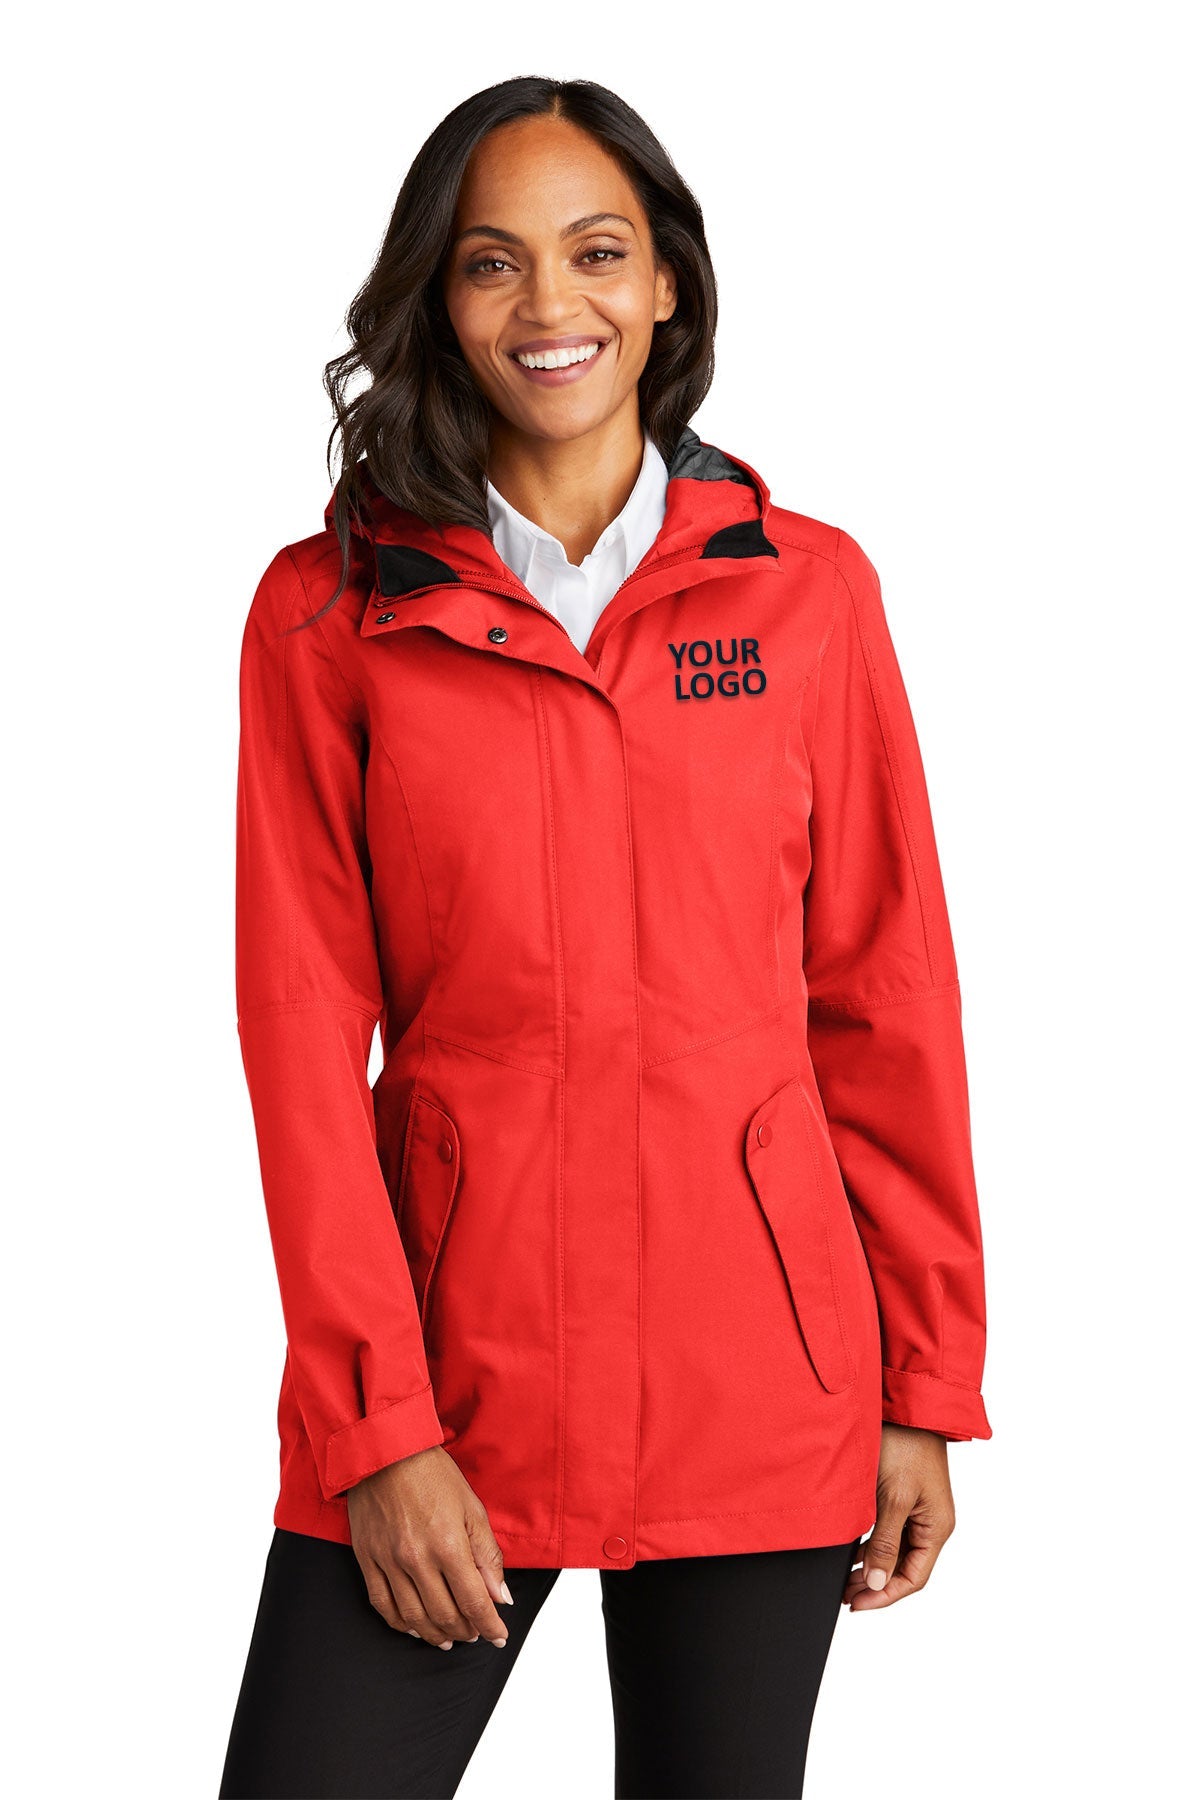 Port Authority Red Pepper L900 company jackets with logo